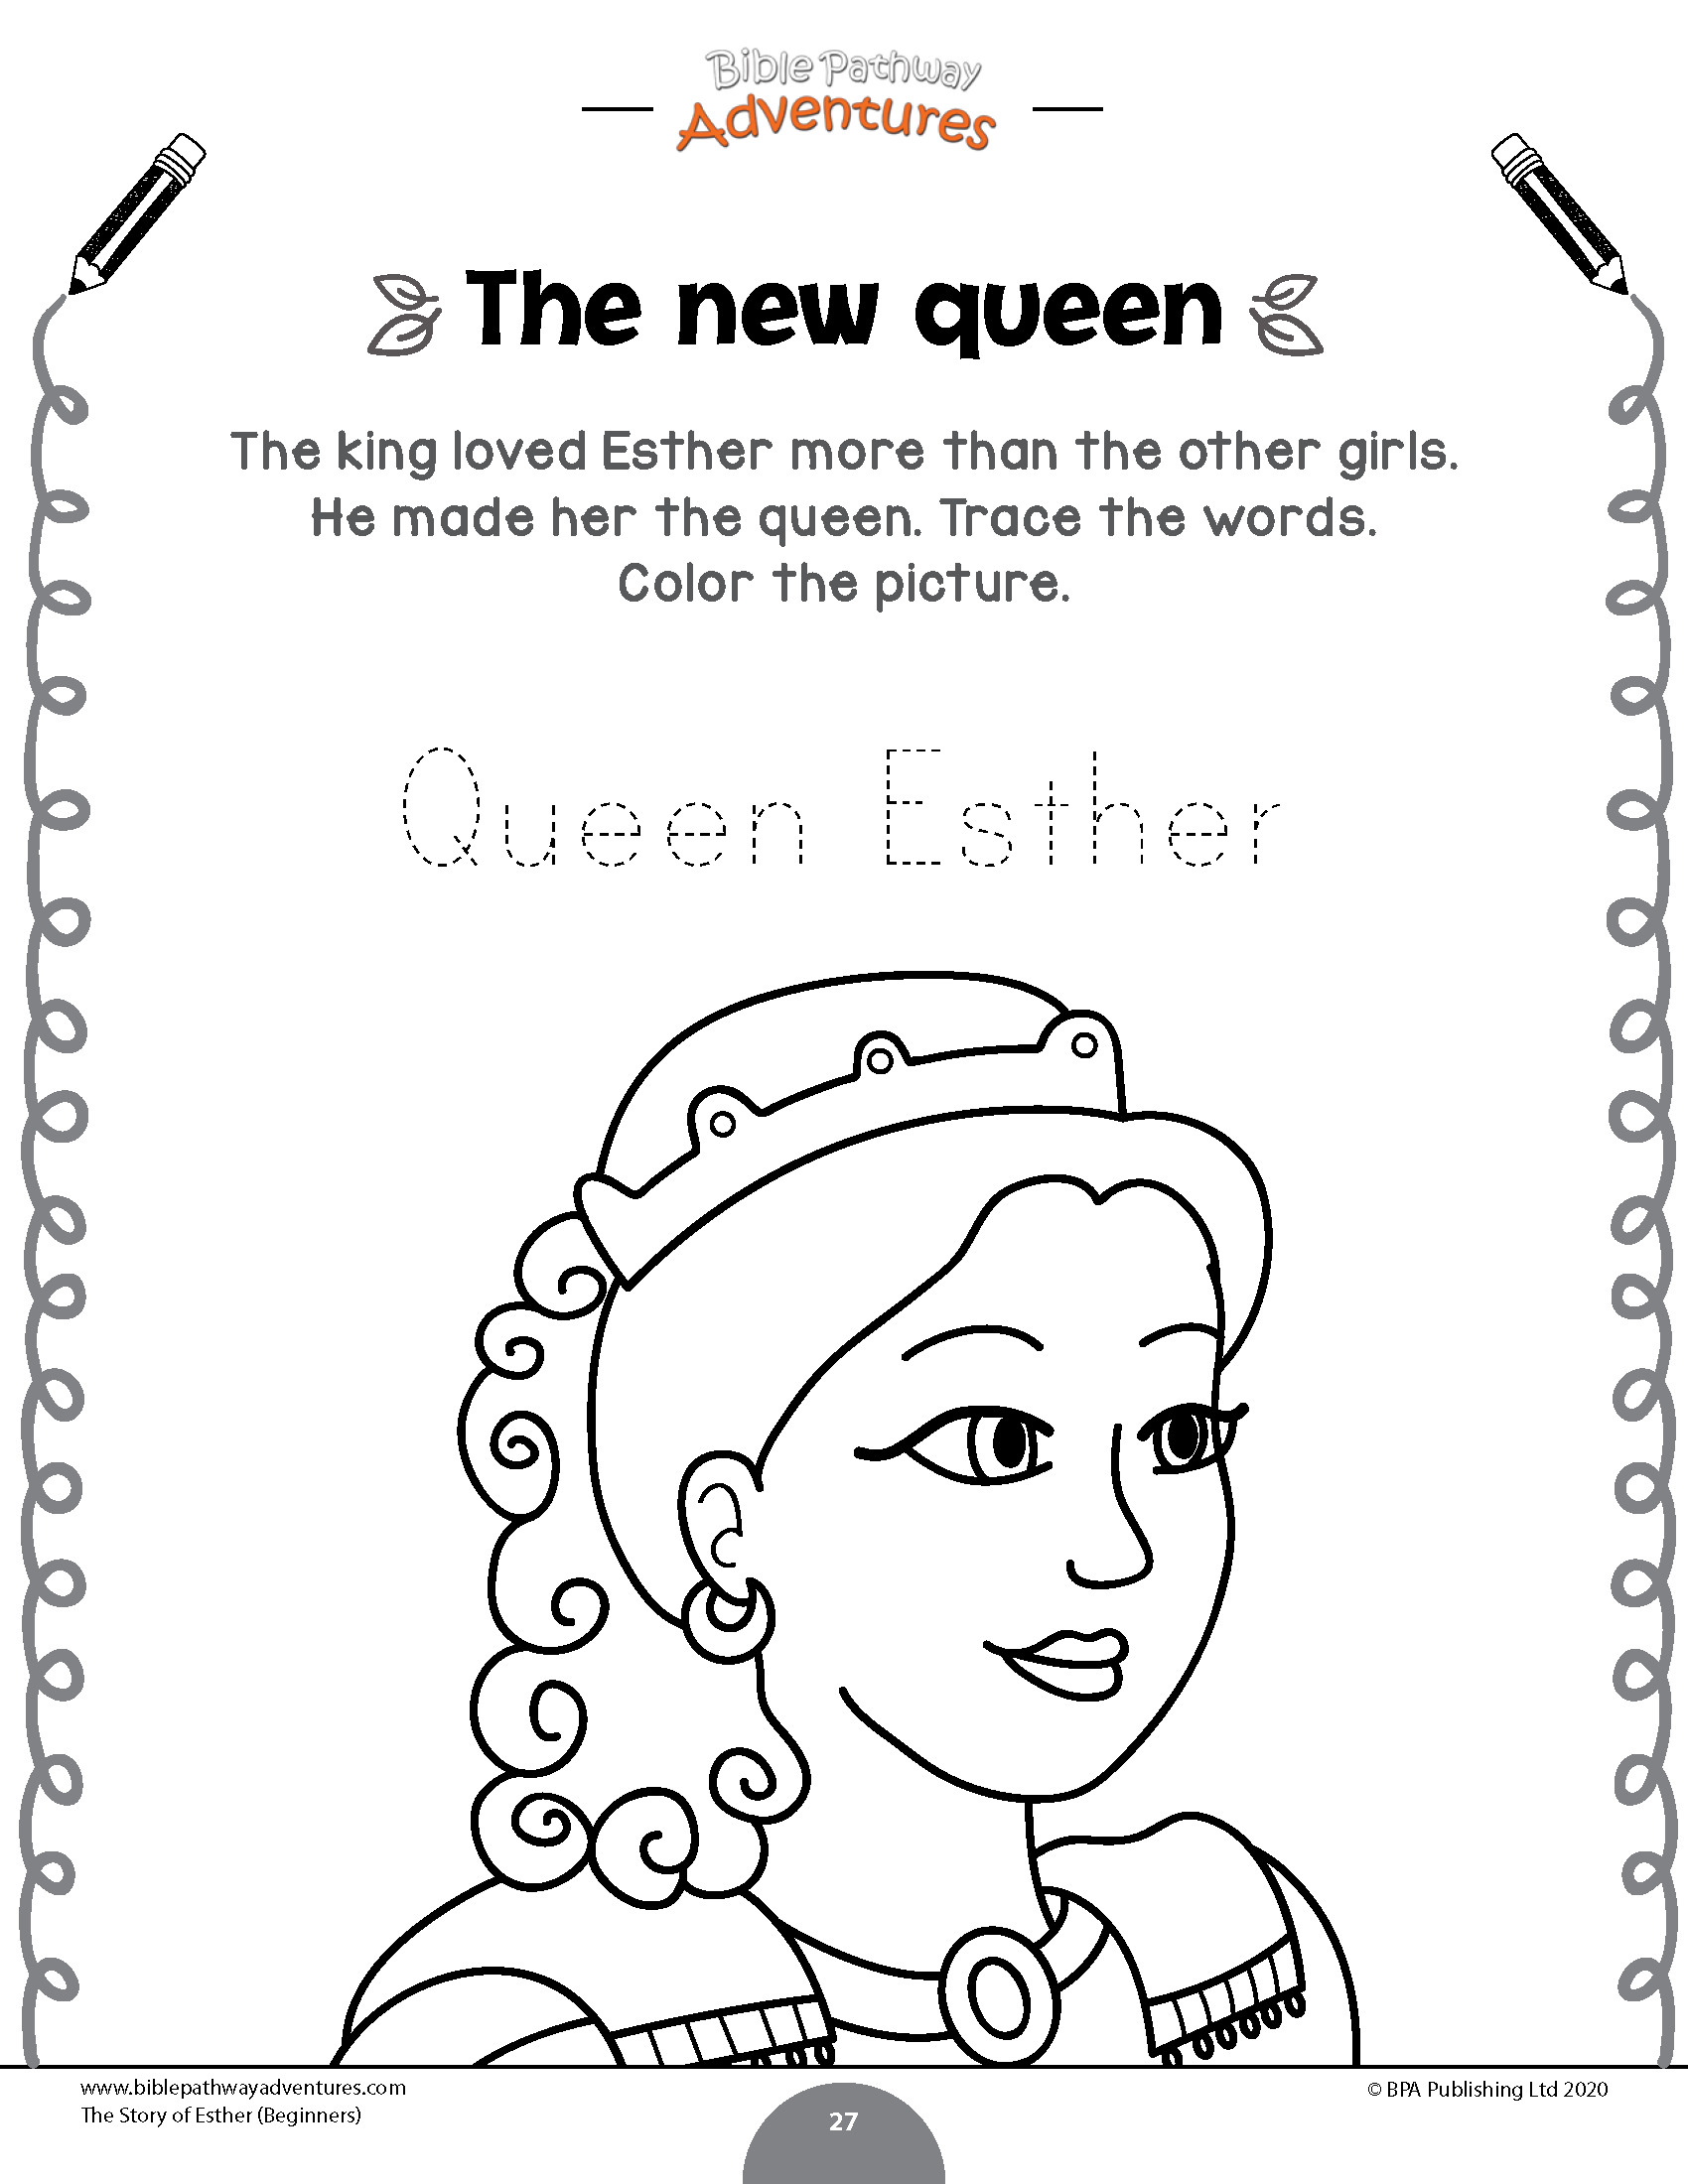 Esther activity book for beginners pdf â bible pathway adventures